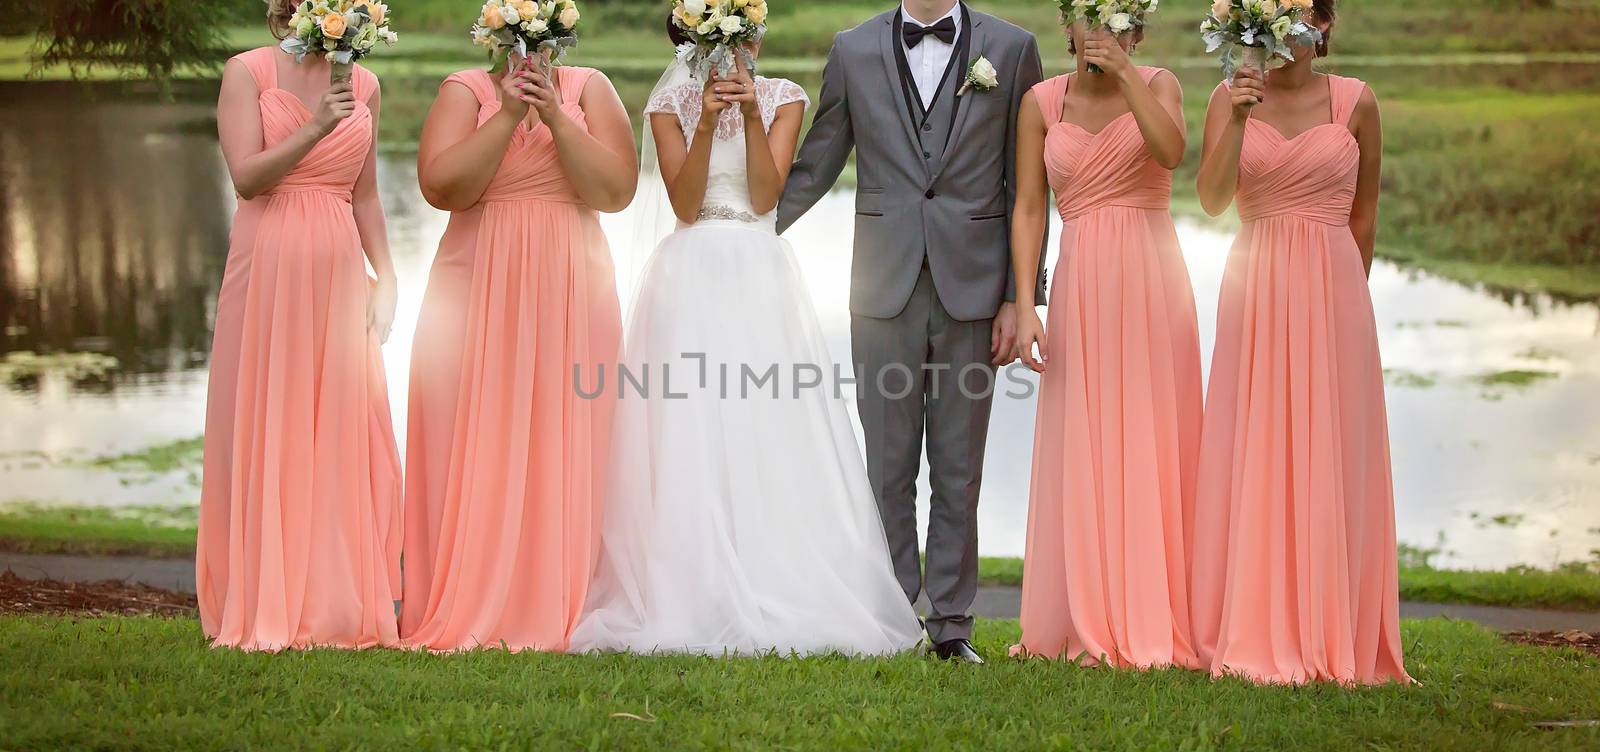 Bride, Bridesmaids and Groom in fun pose with bouquets after the wedding ceremony